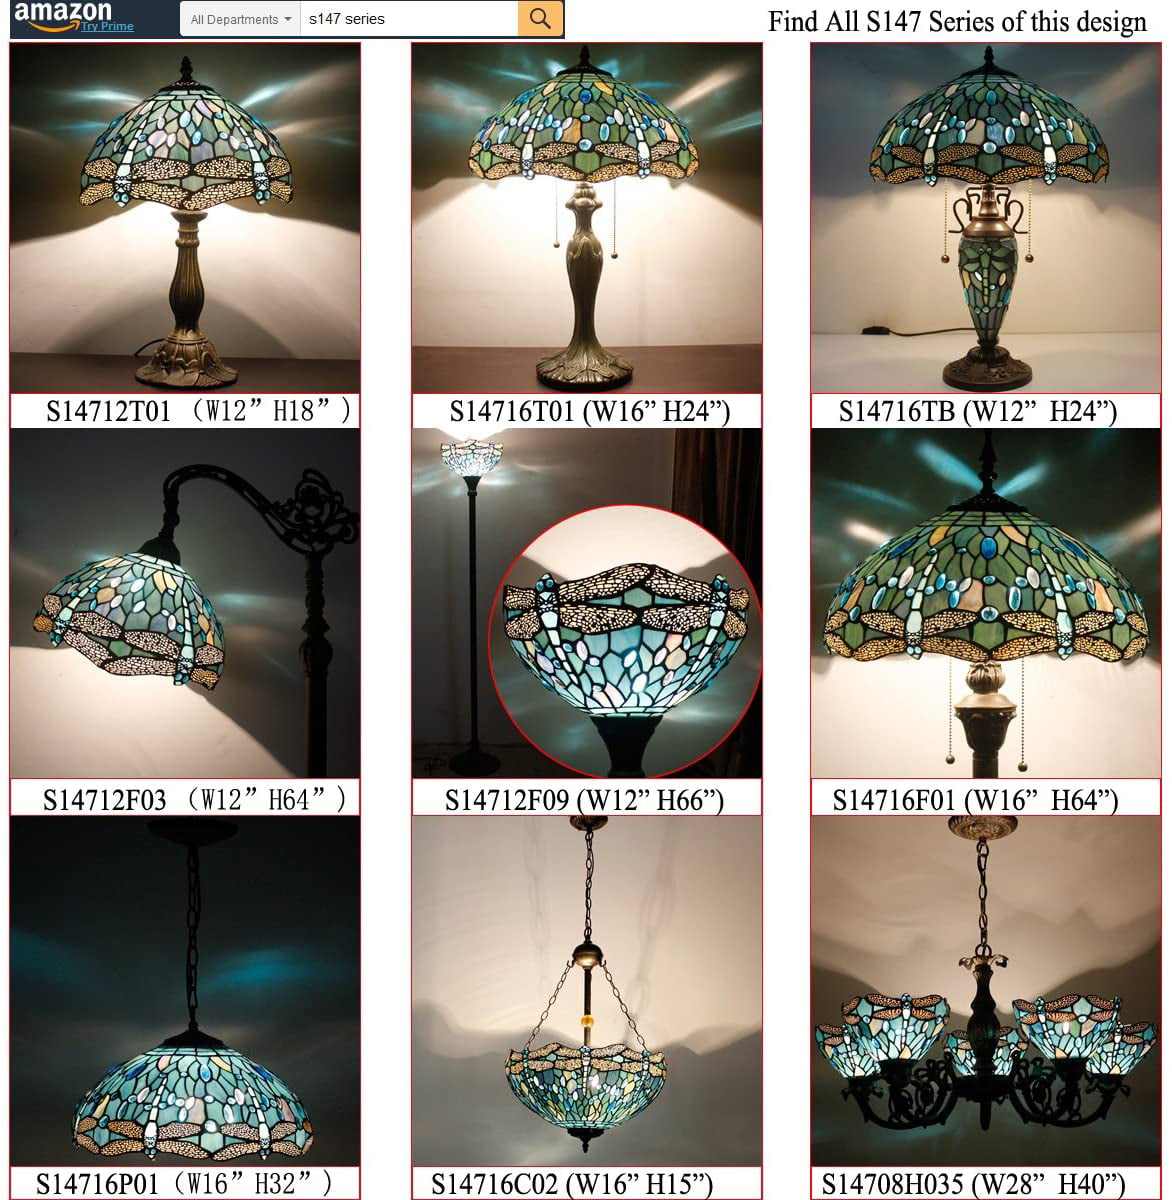 BBNBDMZ  Floor Lamp Sea Blue Stained Glass Dragonfly Light 12X12X66 Inches Pole Torchiere Standing Corner Torch Uplight Decor Bedroom Living Room  Office S147 Series